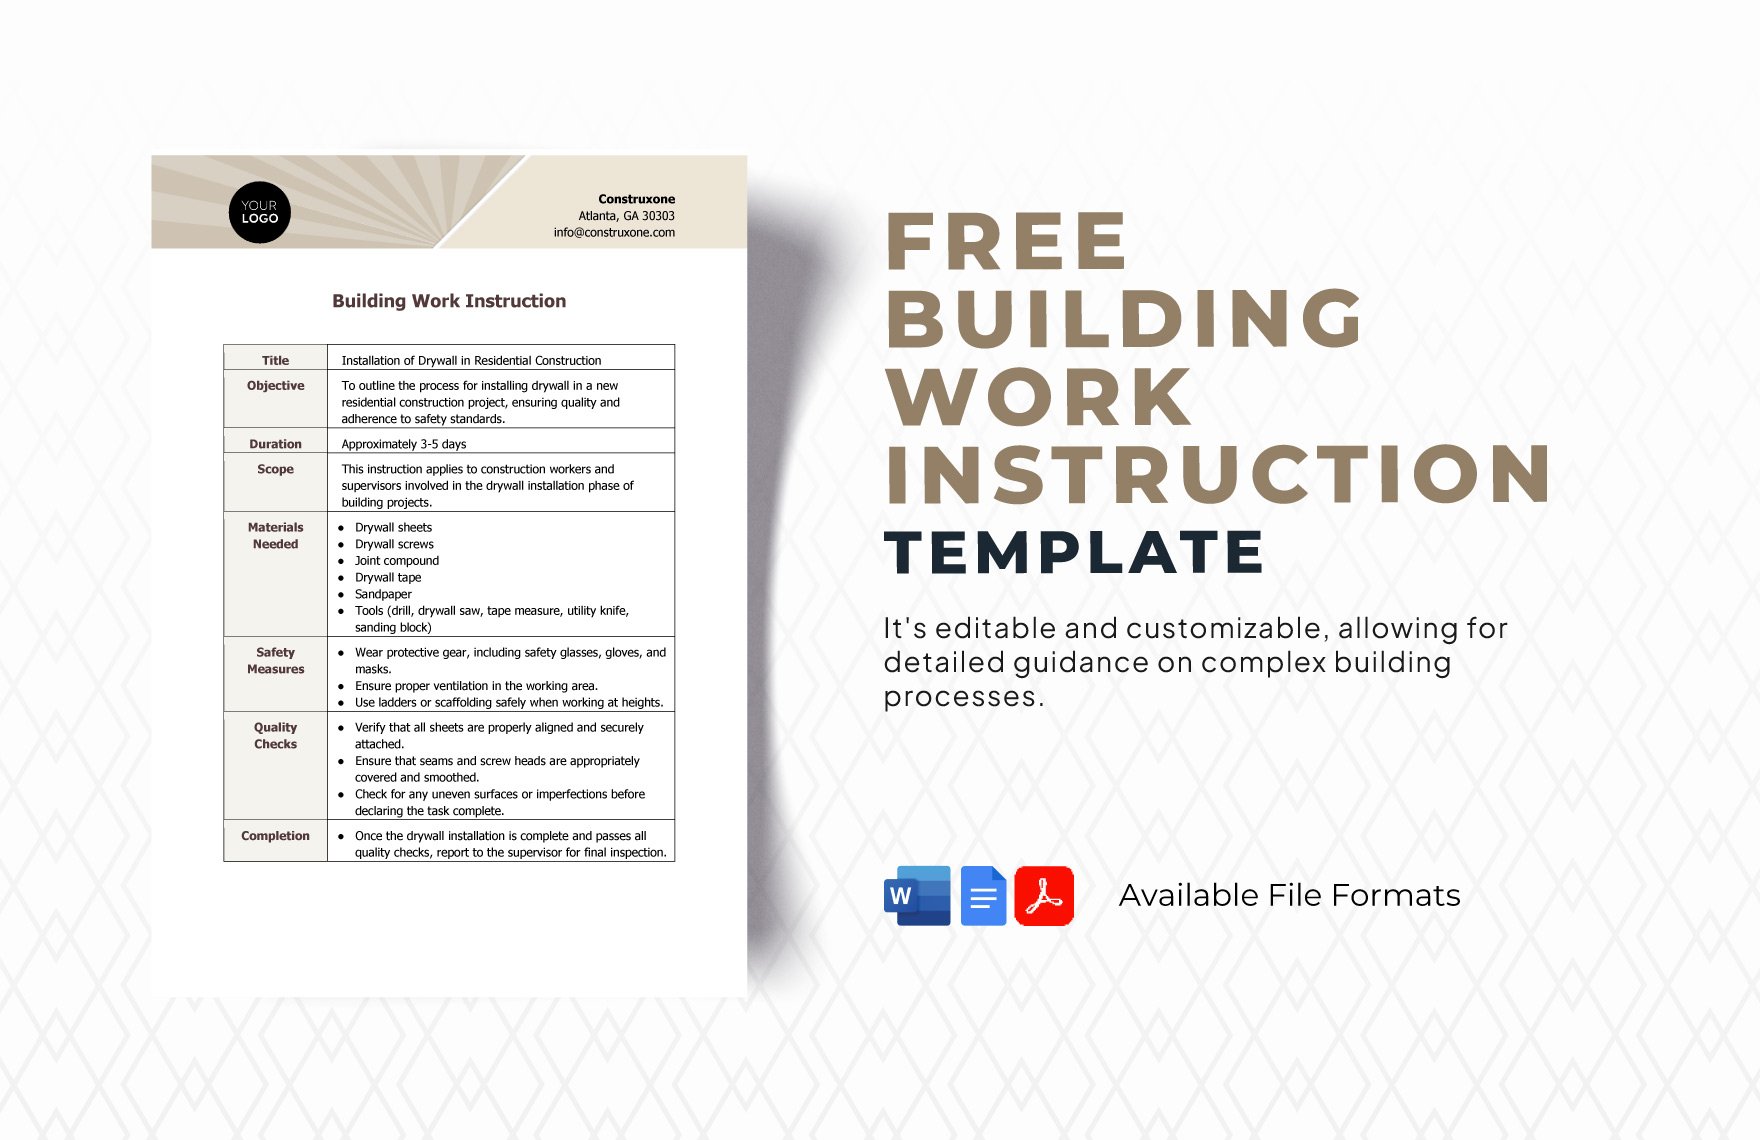 Building Work Instruction Template